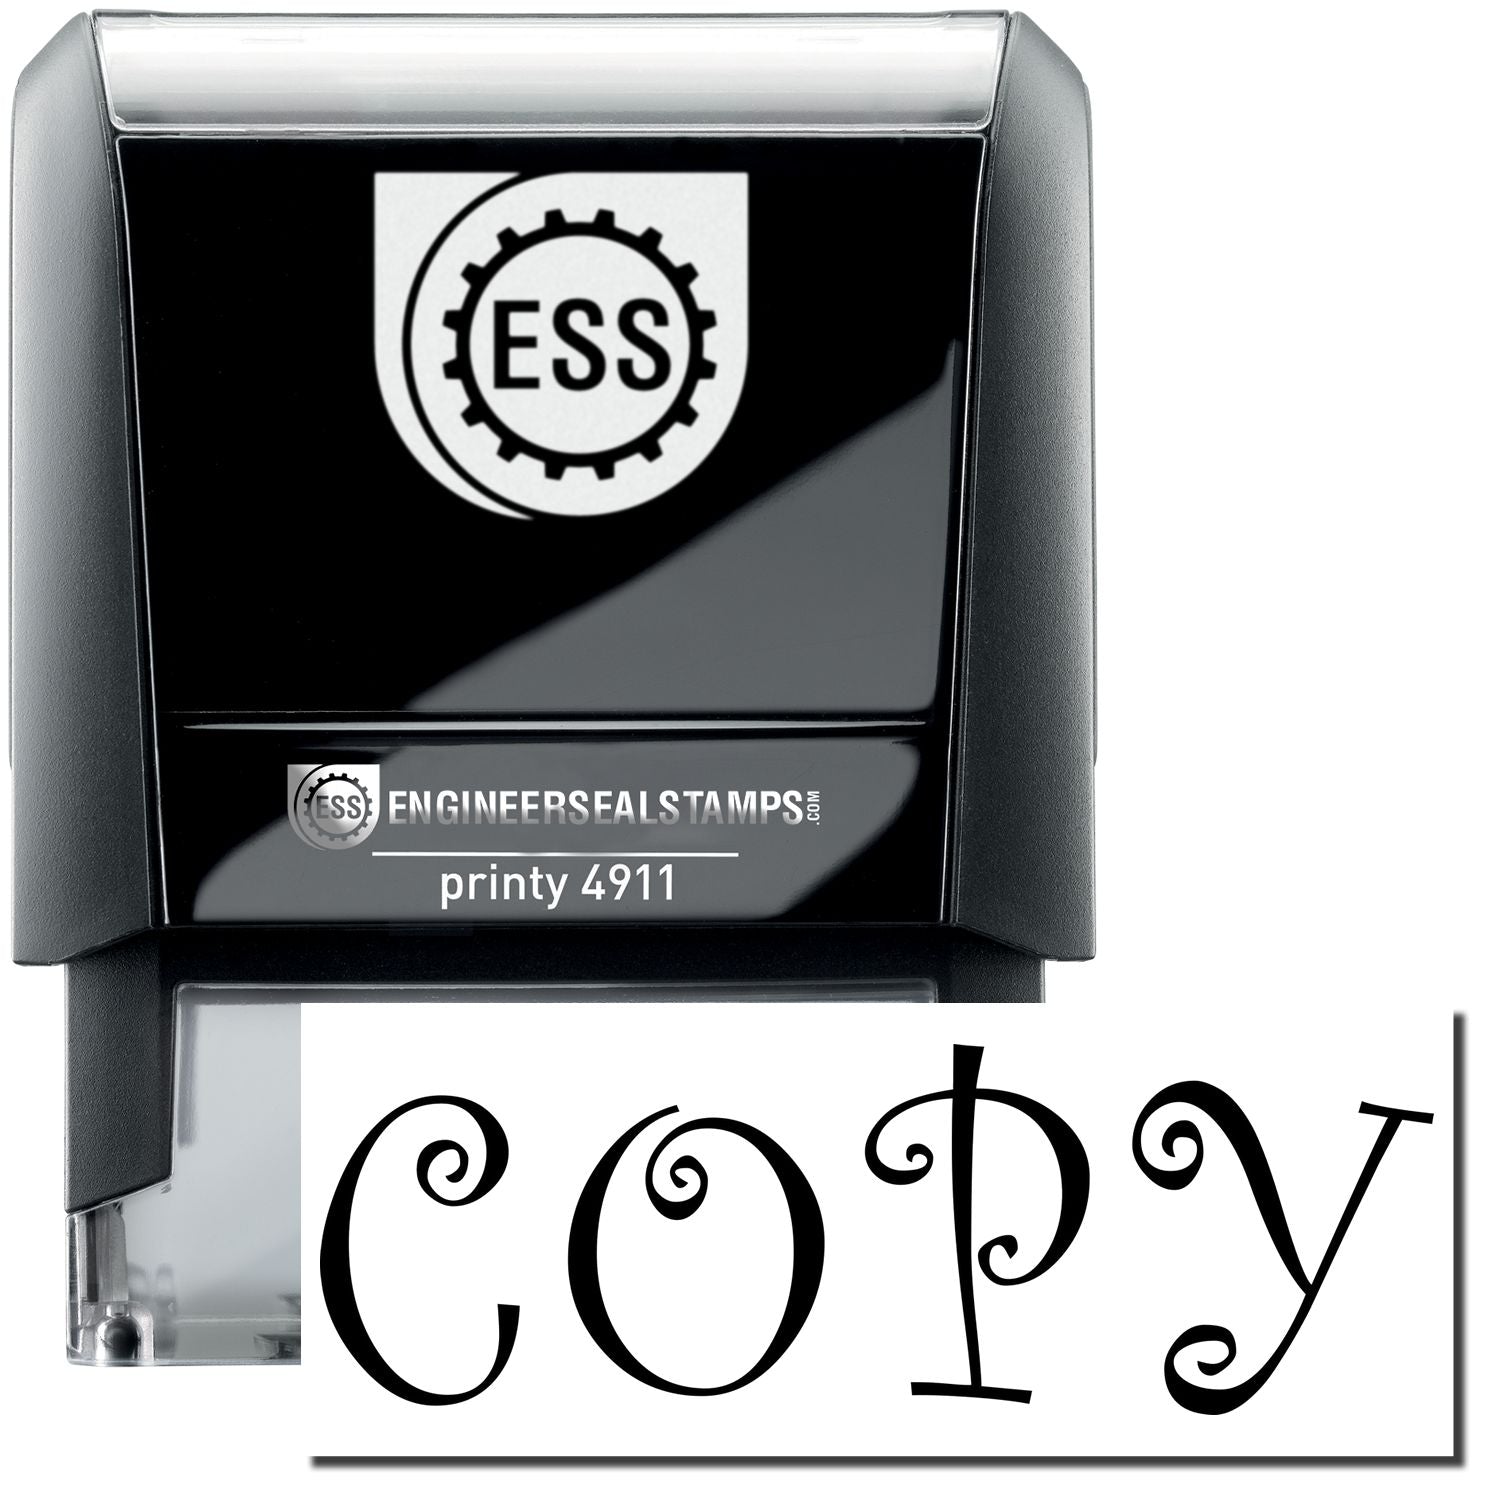 A self-inking stamp with a stamped image showing how the text "COPY" in a curly font is displayed after stamping.